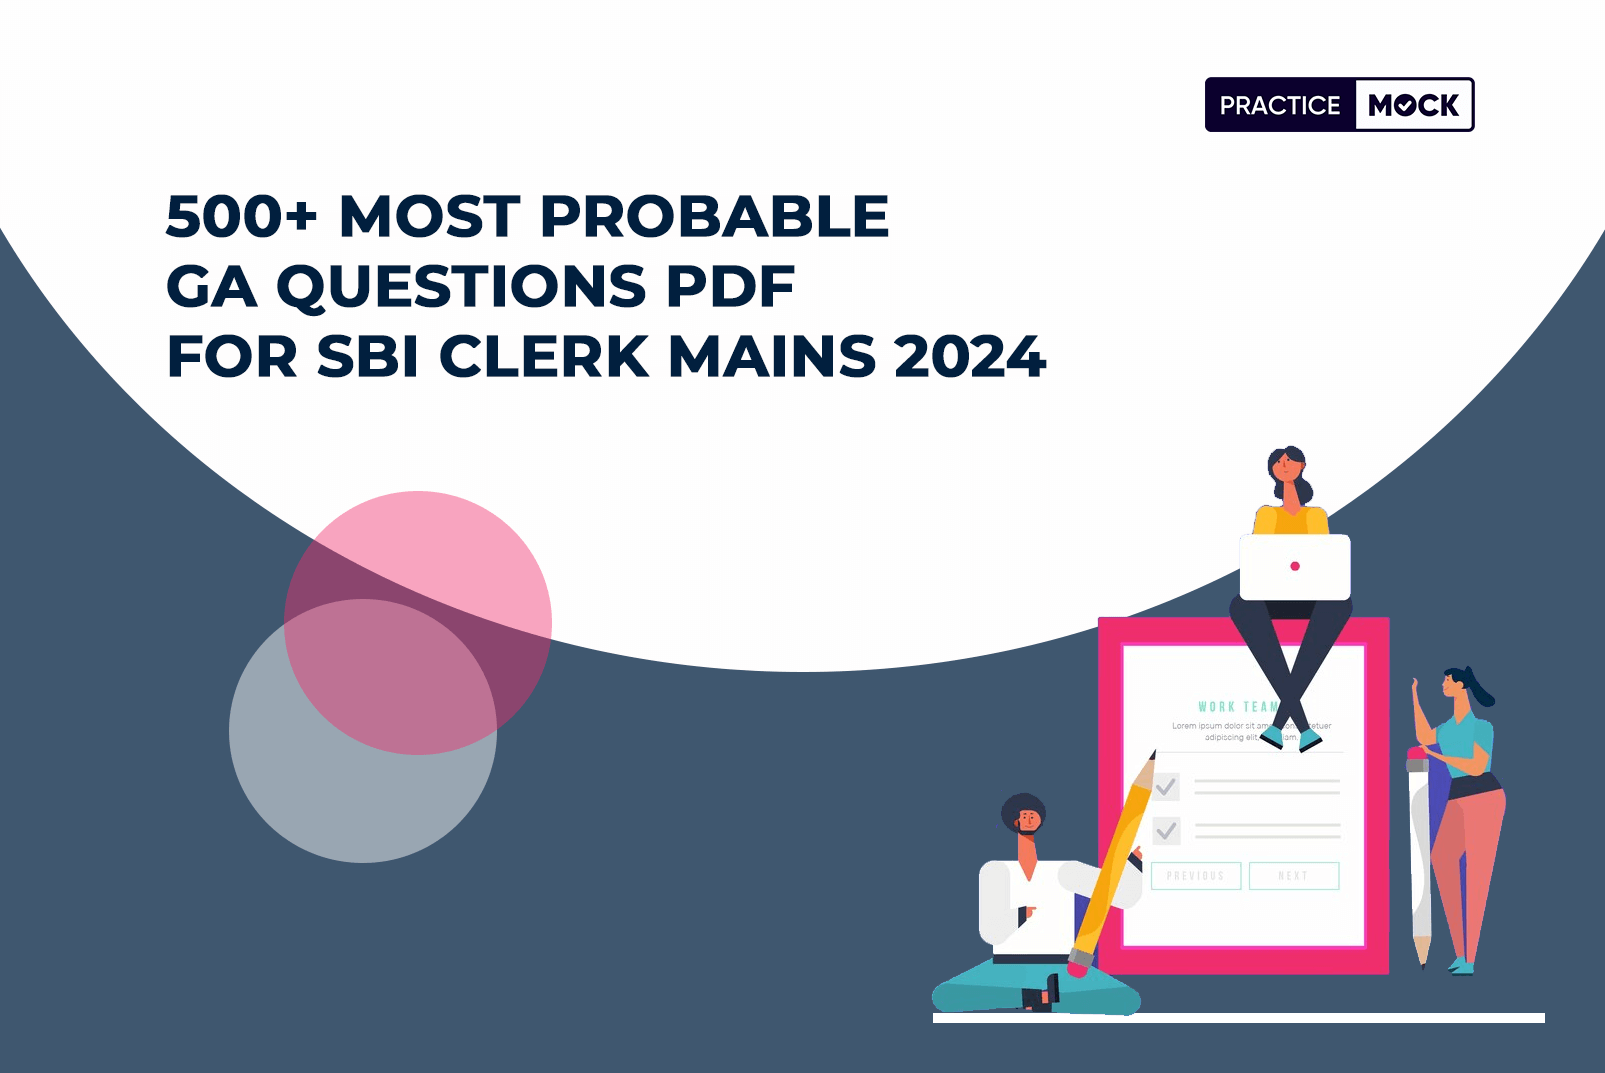 500+ Most Probable GA Questions PDF for SBI Clerk Mains 2024